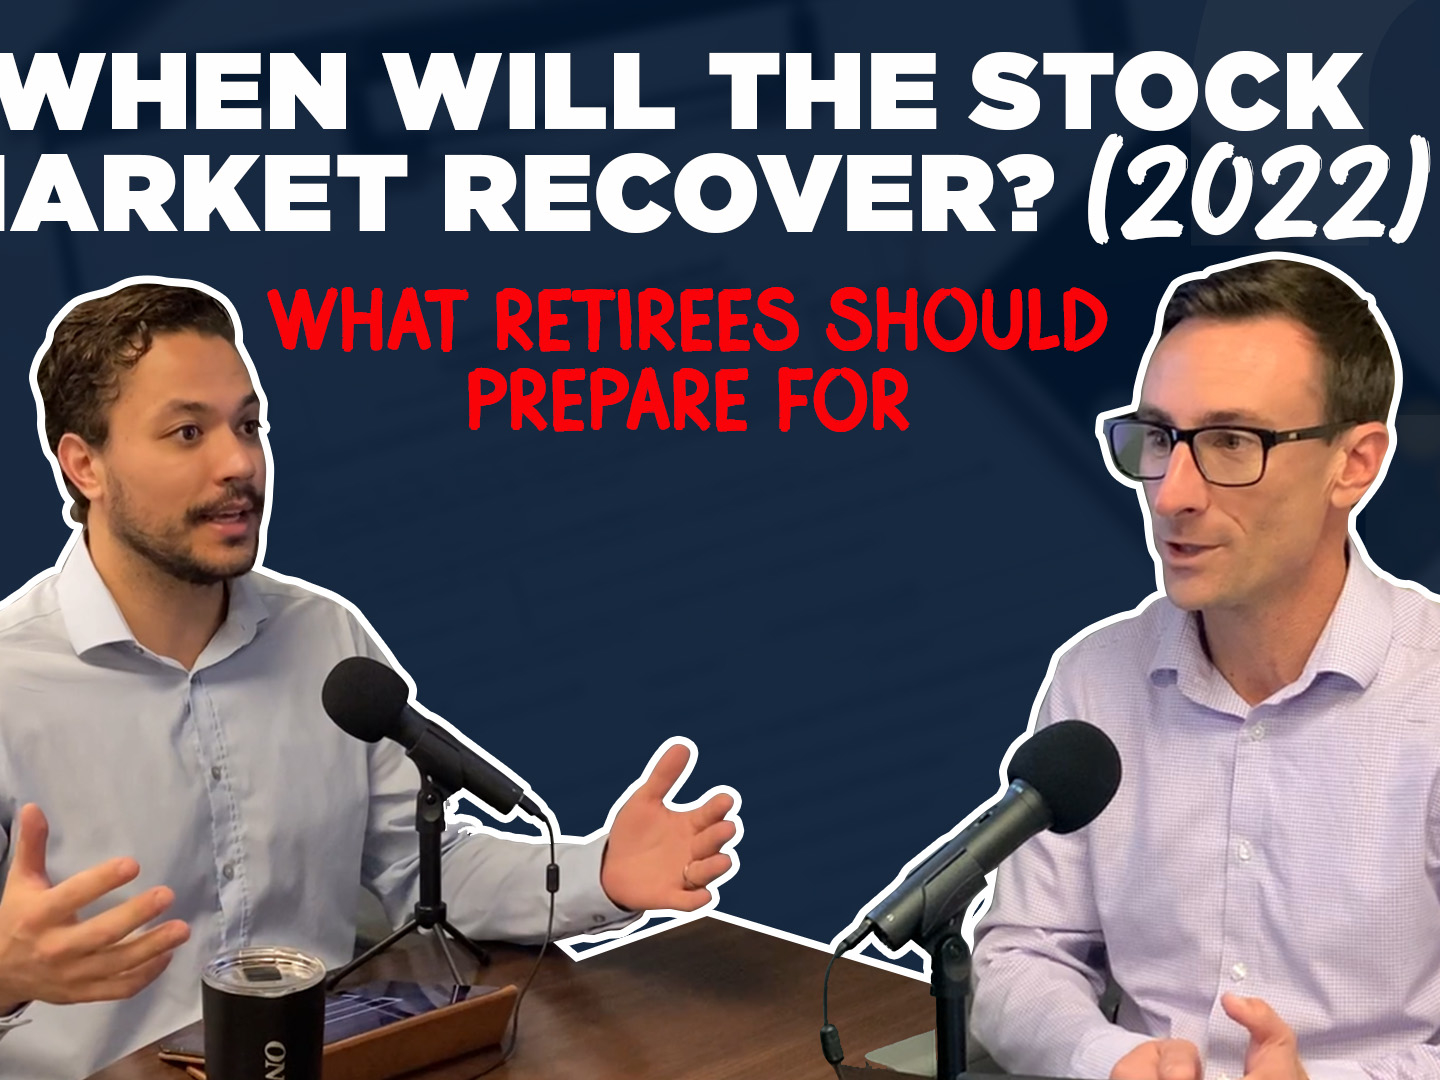 When Will the Stock Market Recover?